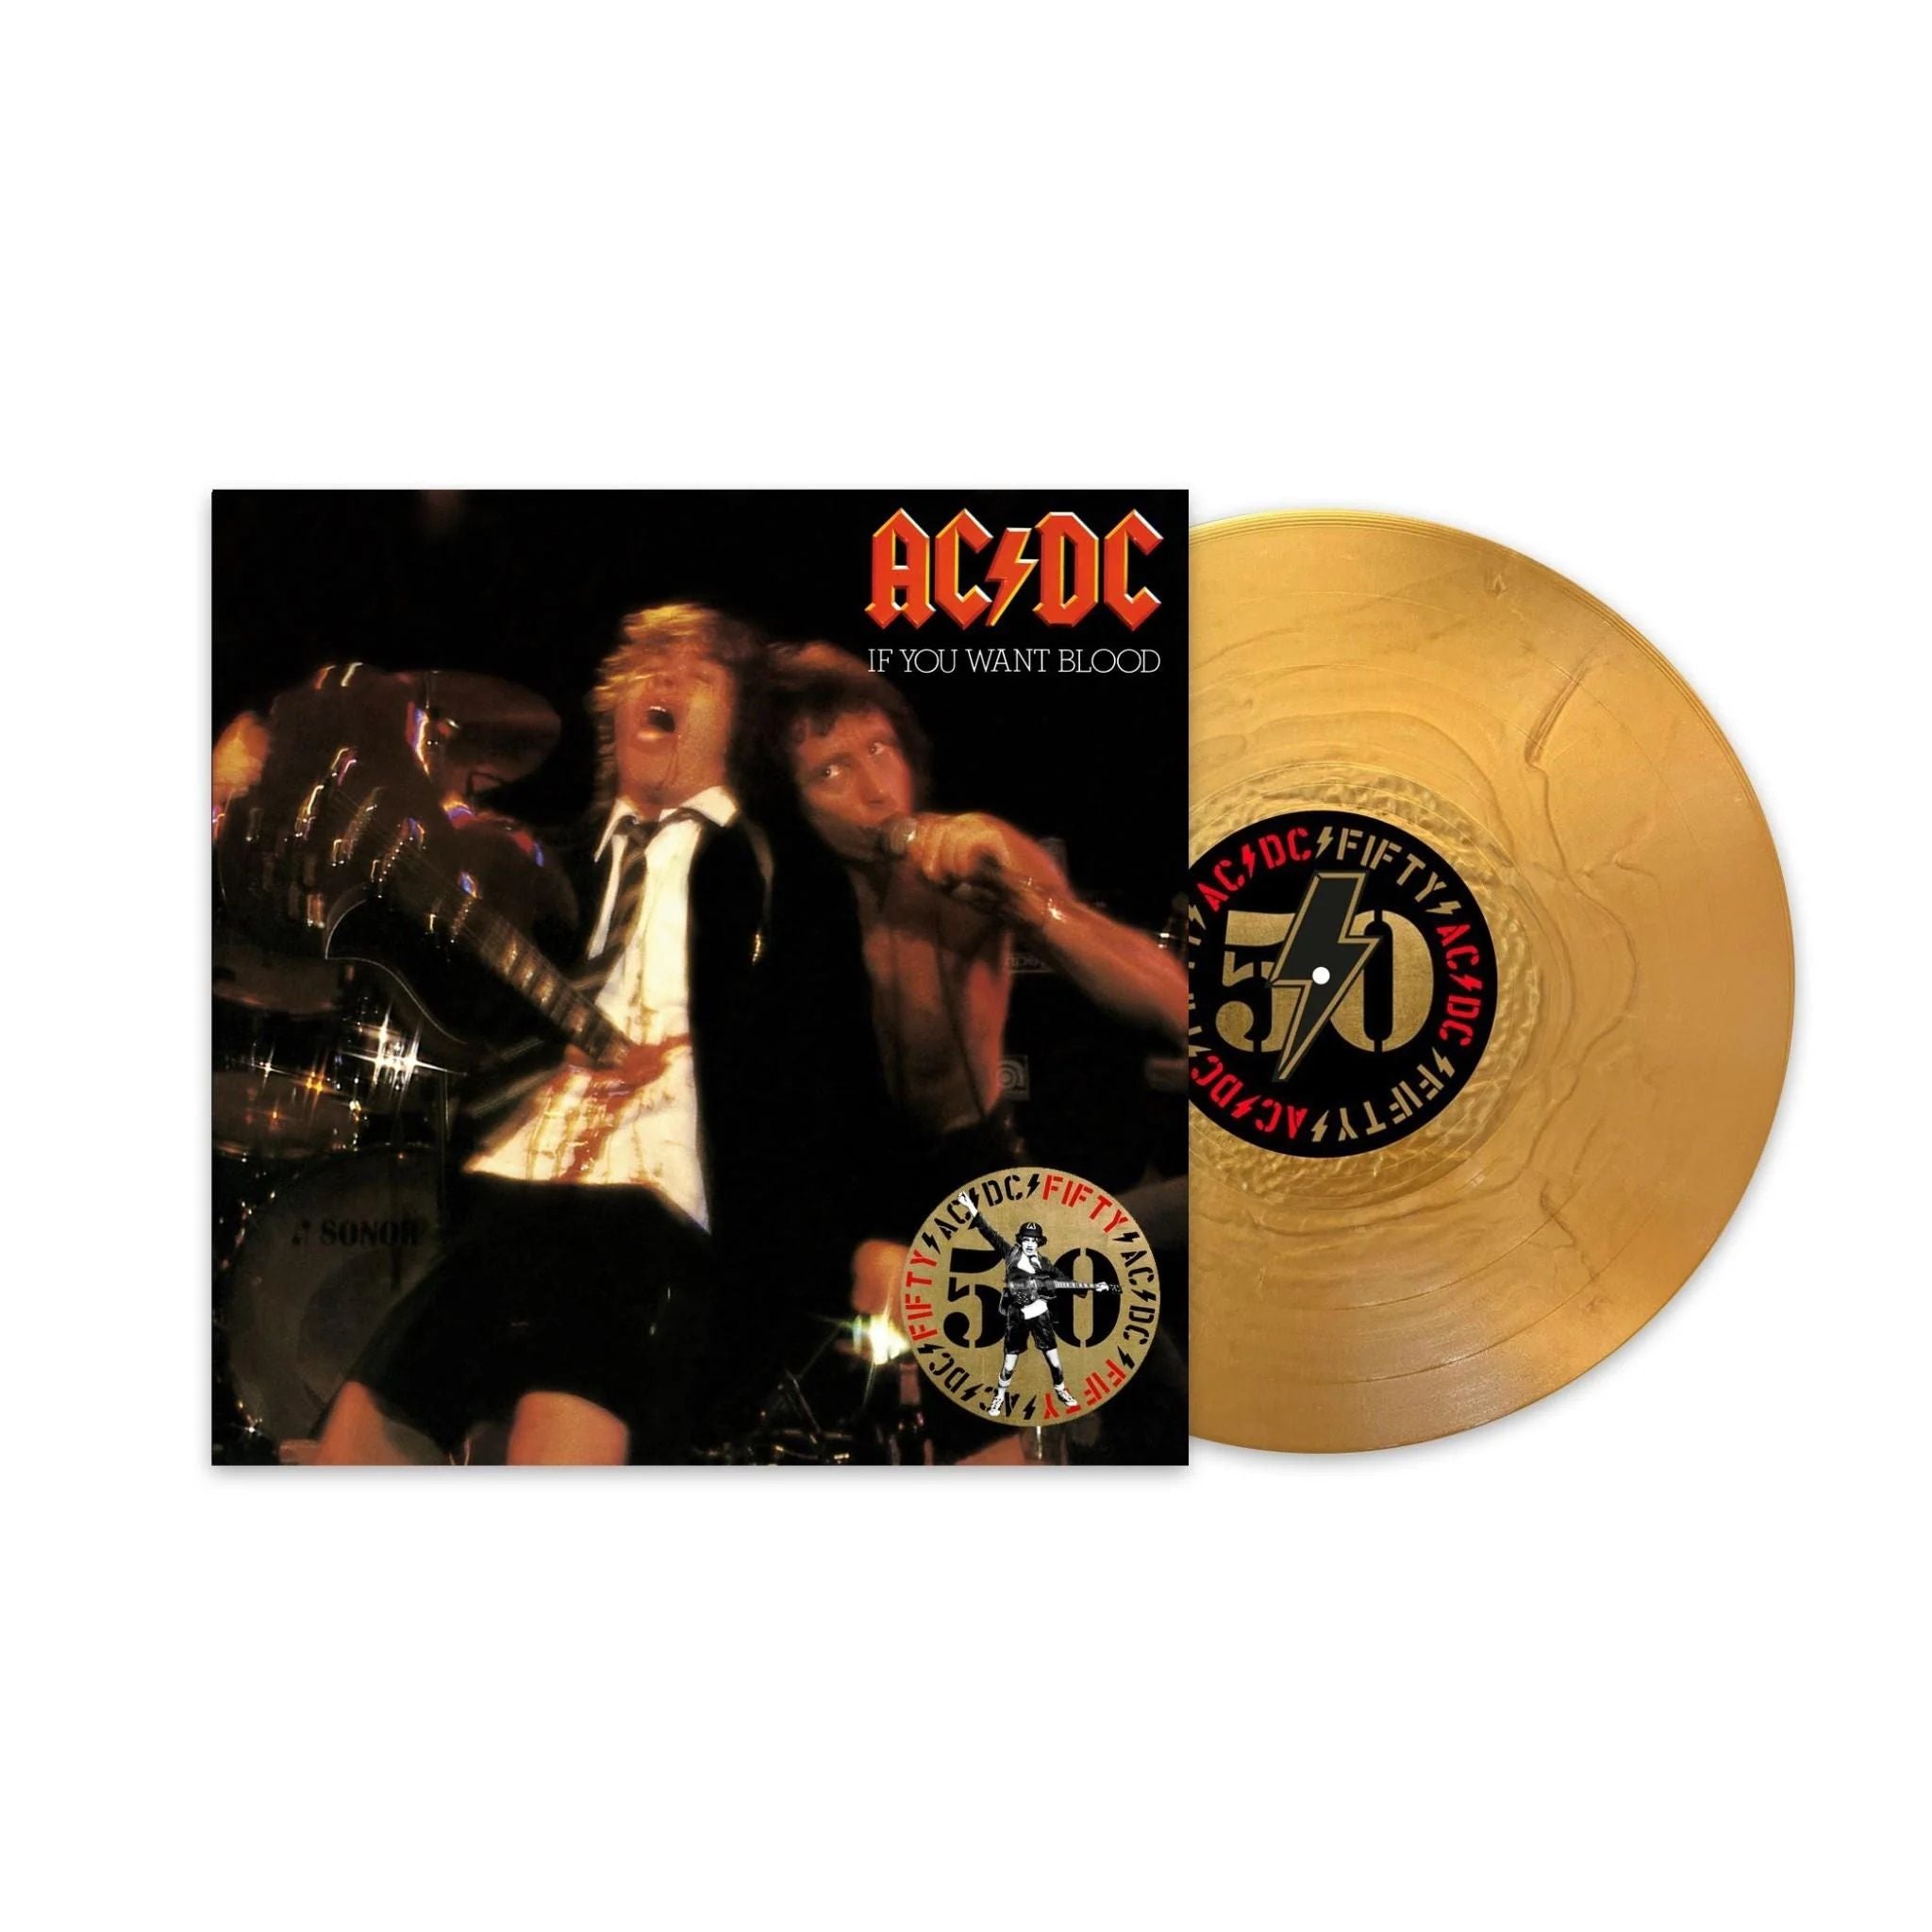 ACDC - If You Want Blood You've Got It (50th Anniversary Special Ed. Gold vinyl reissue with insert) - Vinyl - New - PRE-ORDER